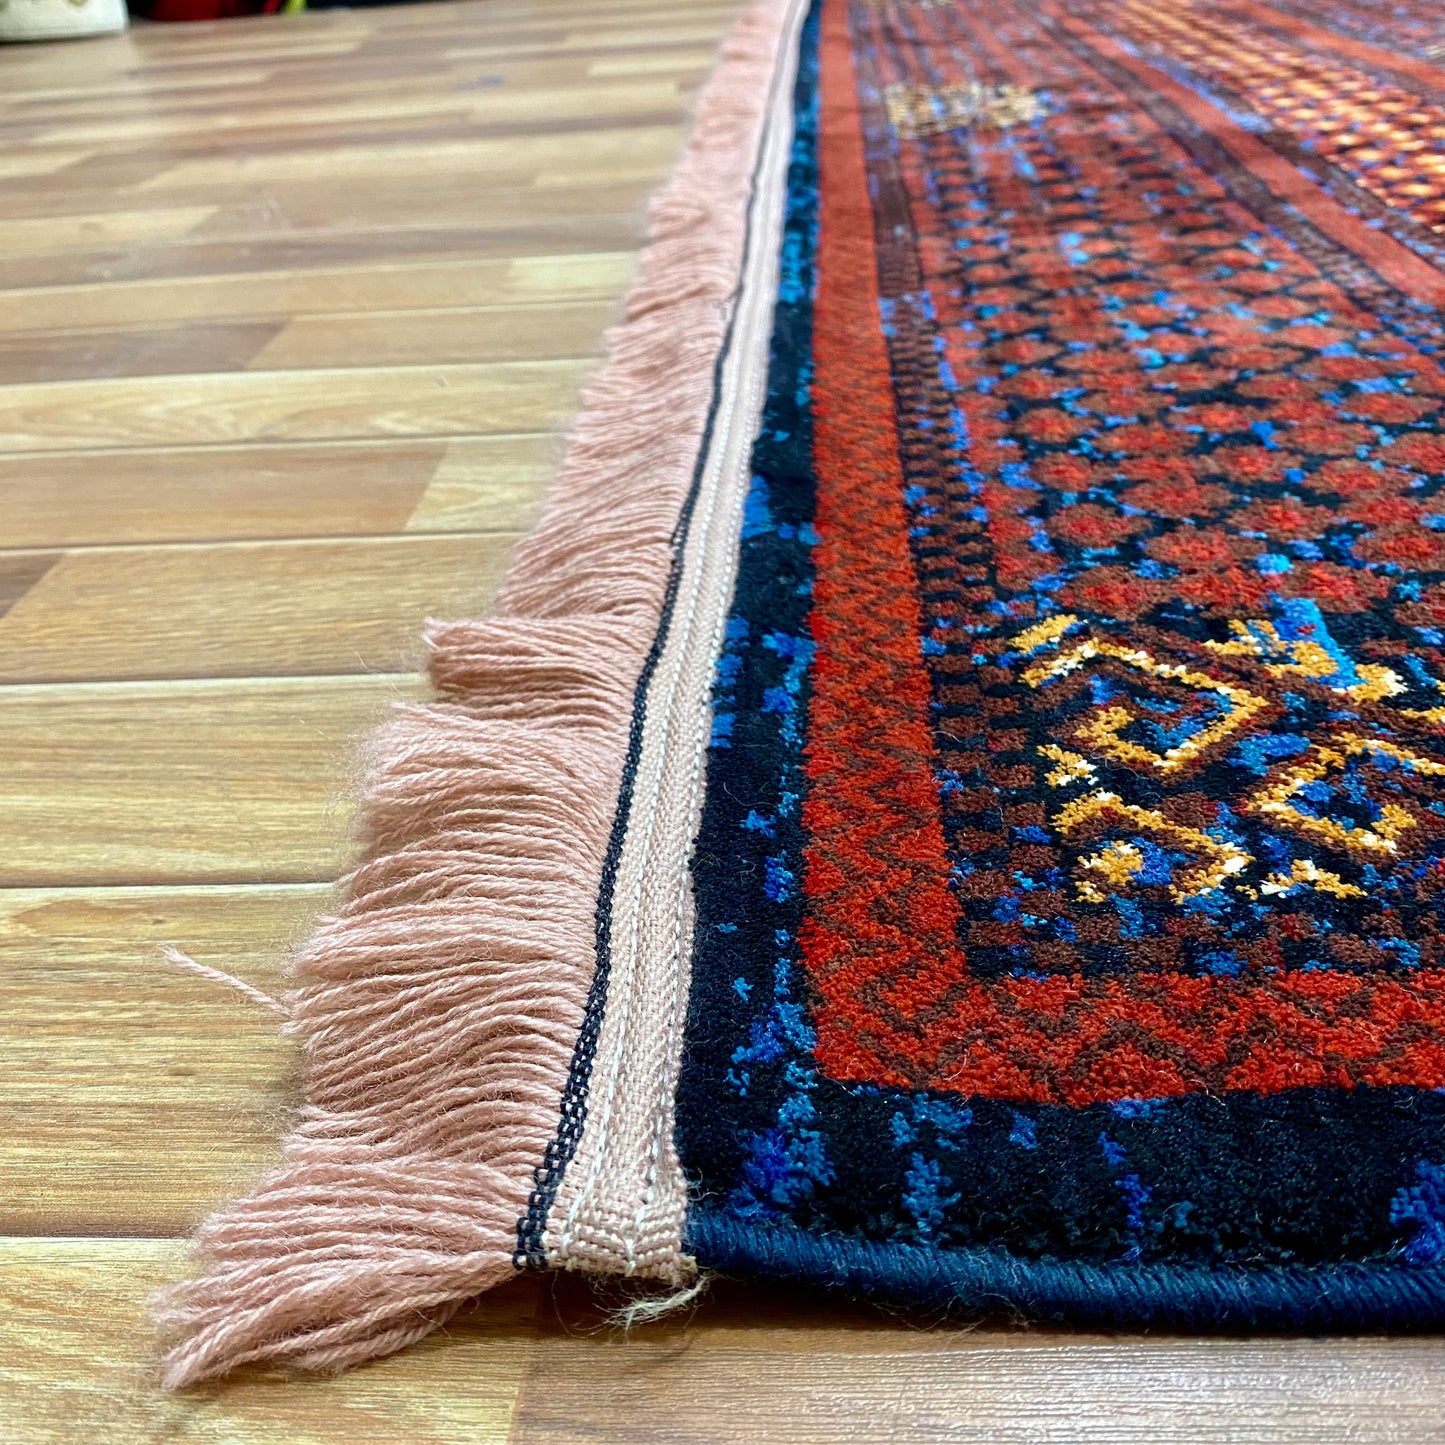 7 ft x 10 ft - Area Rug - Persian Baluchi 5 - Blue and Red Wine - Timeless Beauty for Your Home